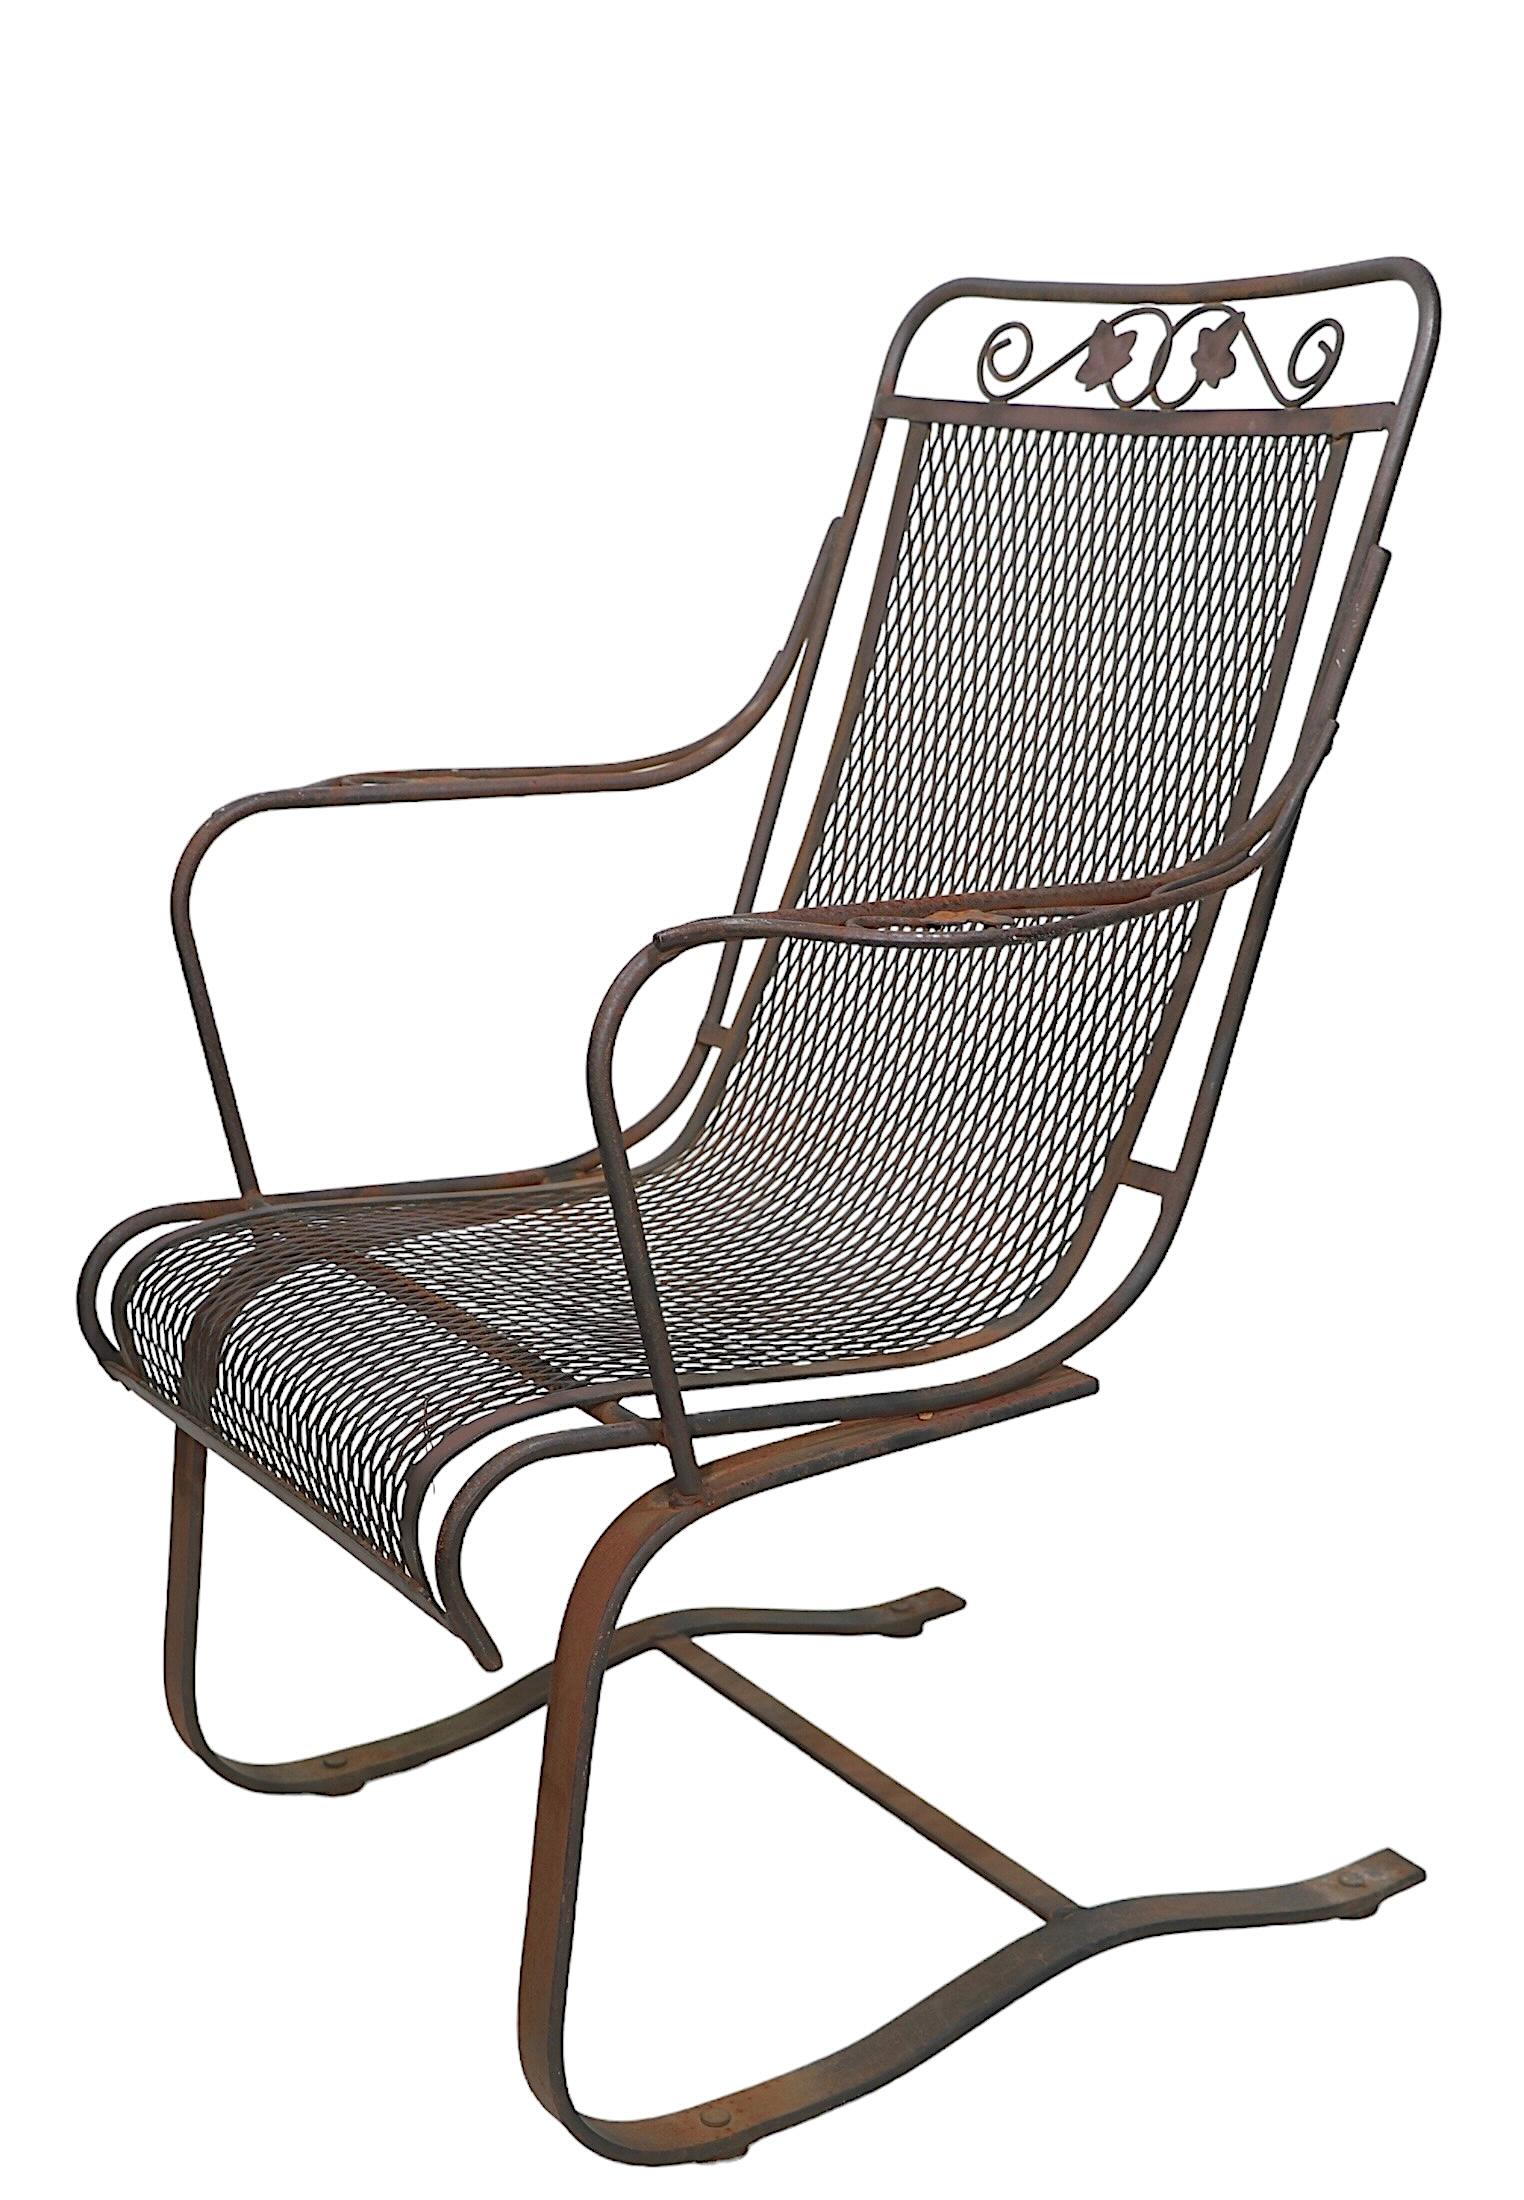 Wrought Iron Cantilevered High Back Lounge Garden Patio Poolside Chair  5